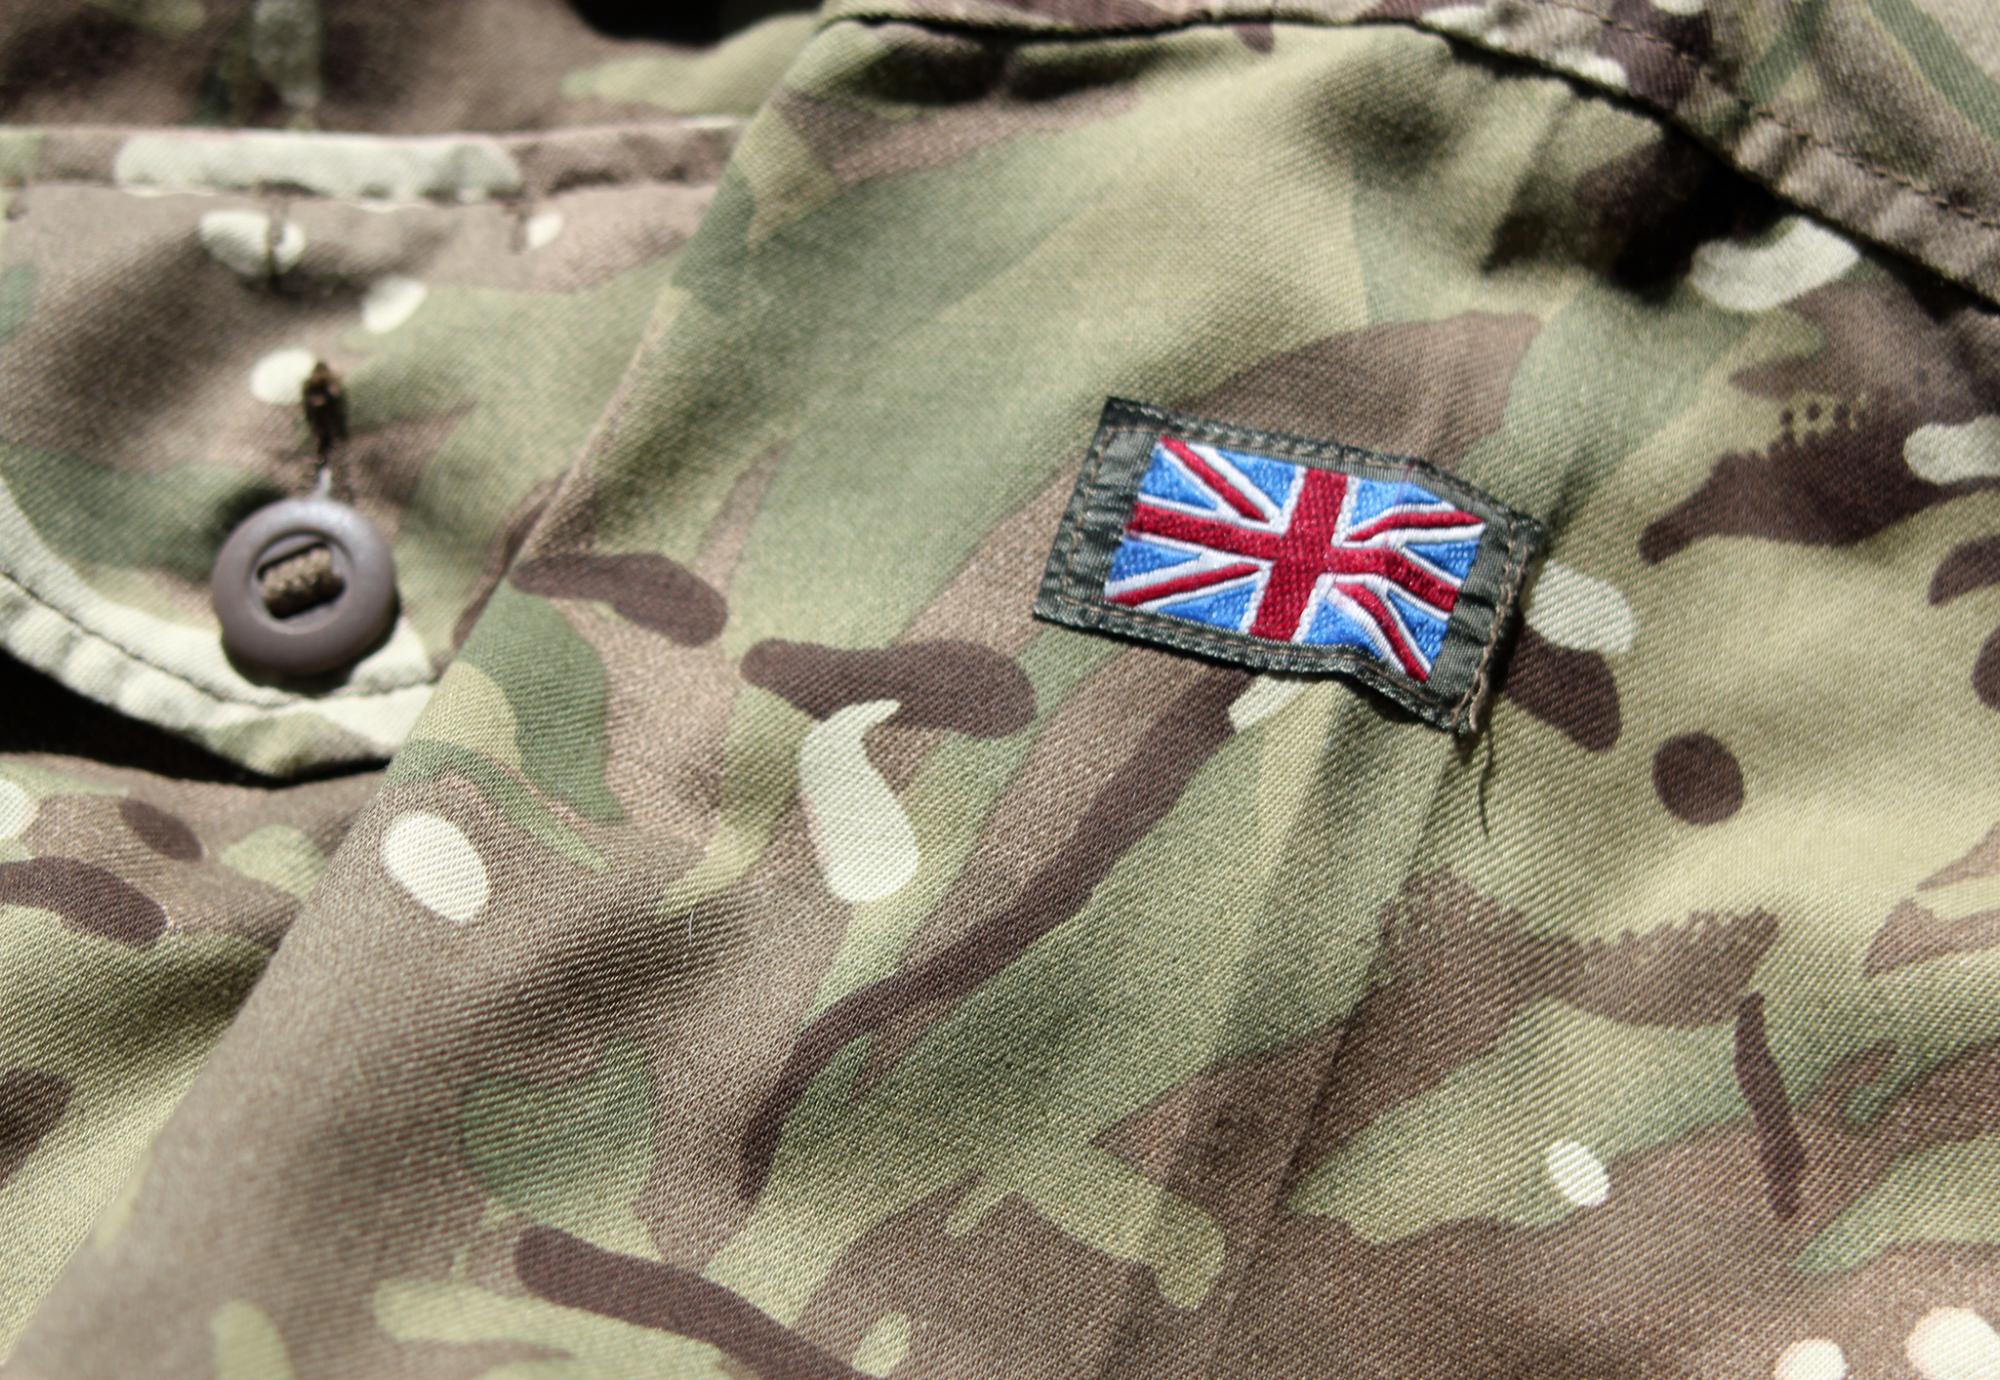 Close up photograph of British military uniform with stitched Union Jack flag